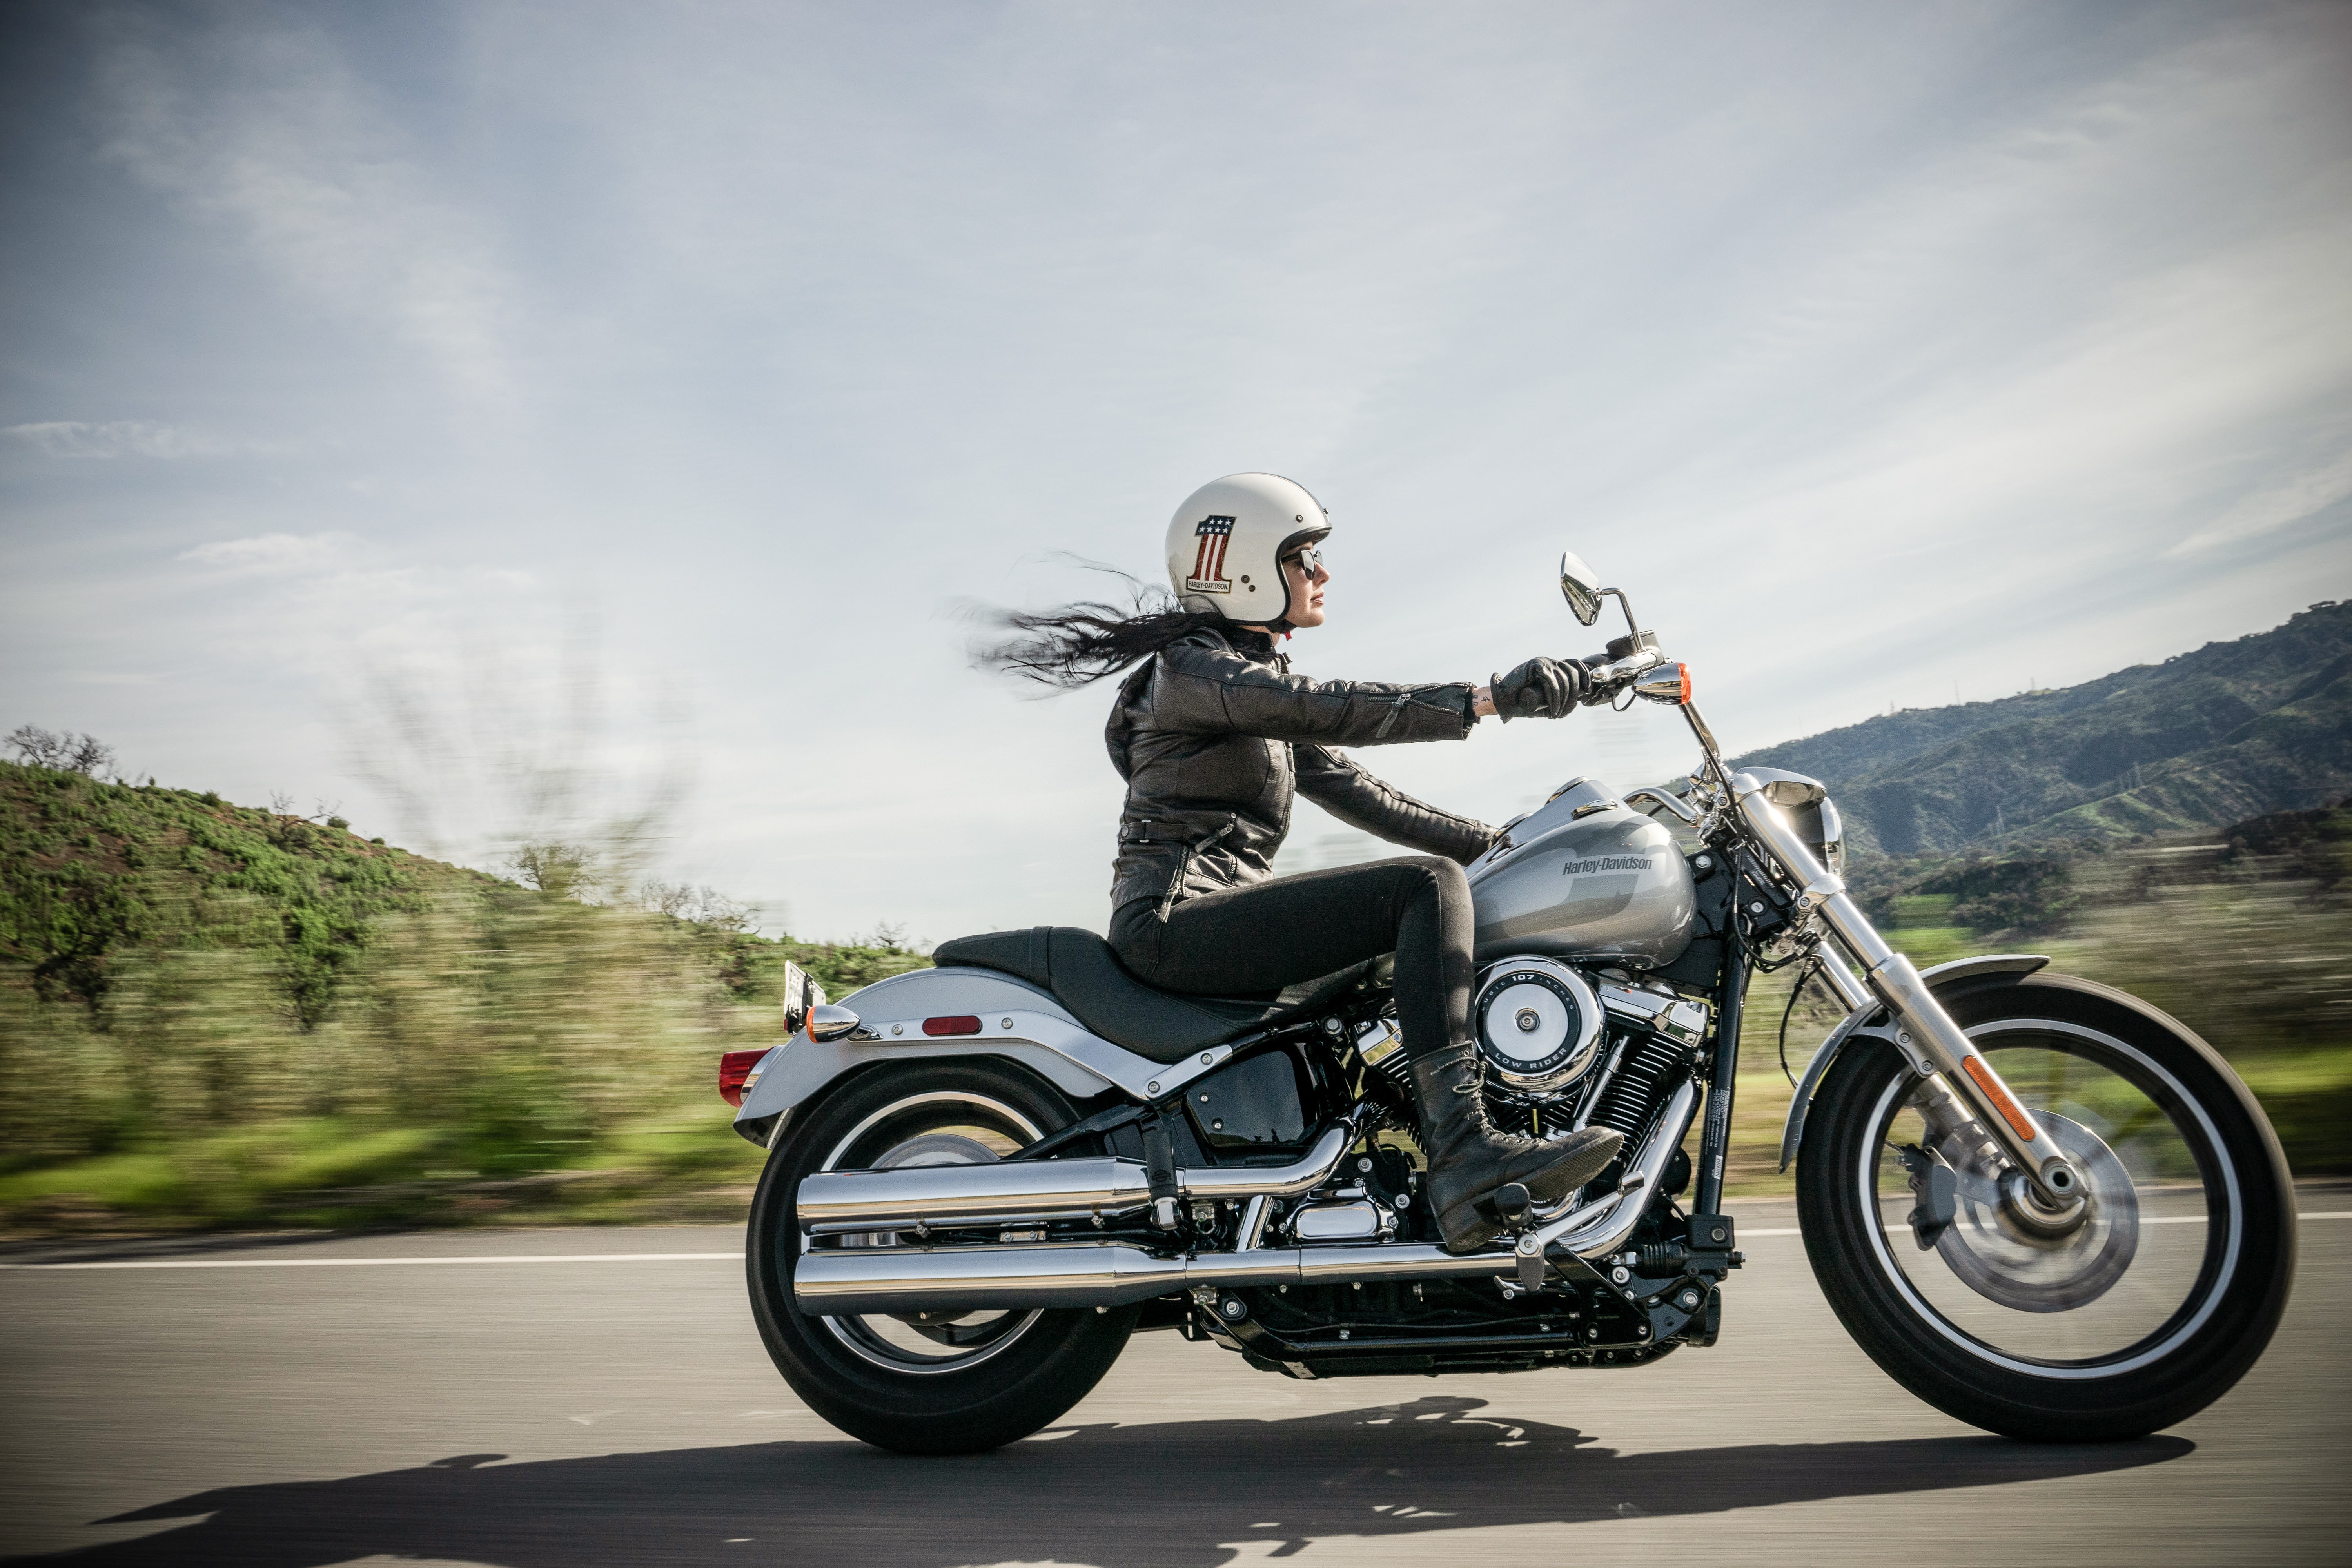 Woman cruising on her motorcycle with her hair flying in the wind.